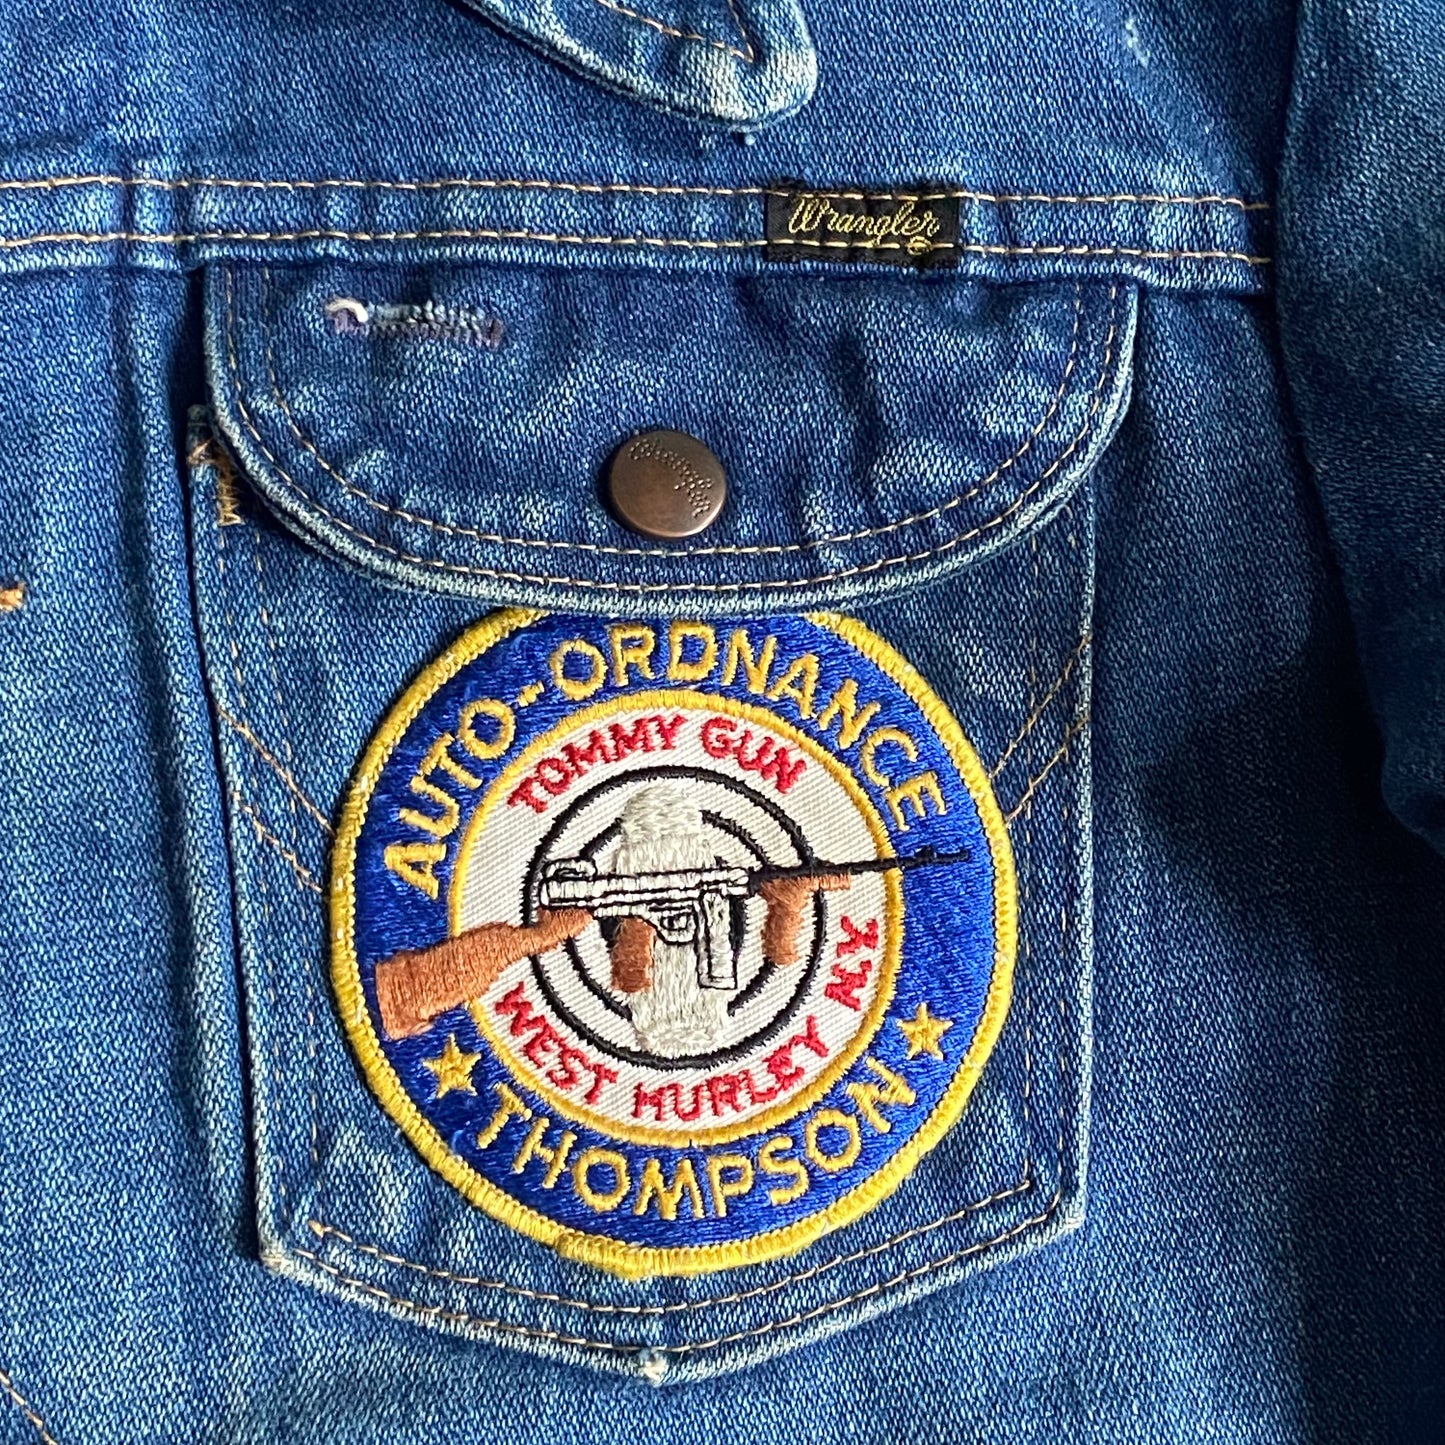 1970s Wrangler denim jacket with gun patches, small